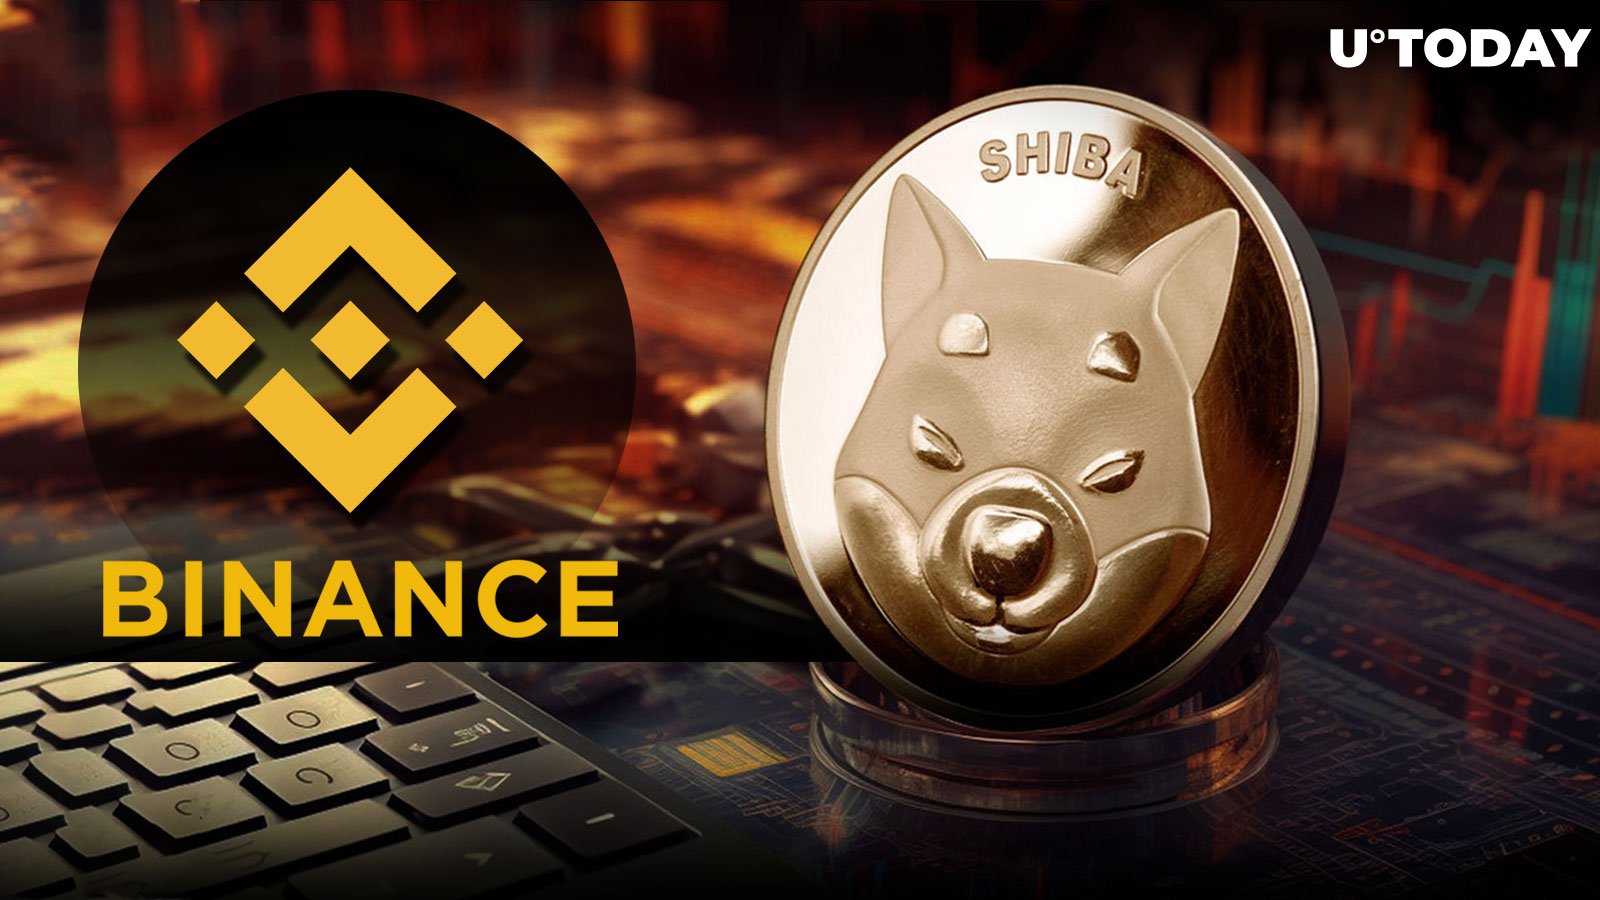 2.28 Trillion Shiba Inu (SHIB) Tokens Moved out of Binance - What's Happening?